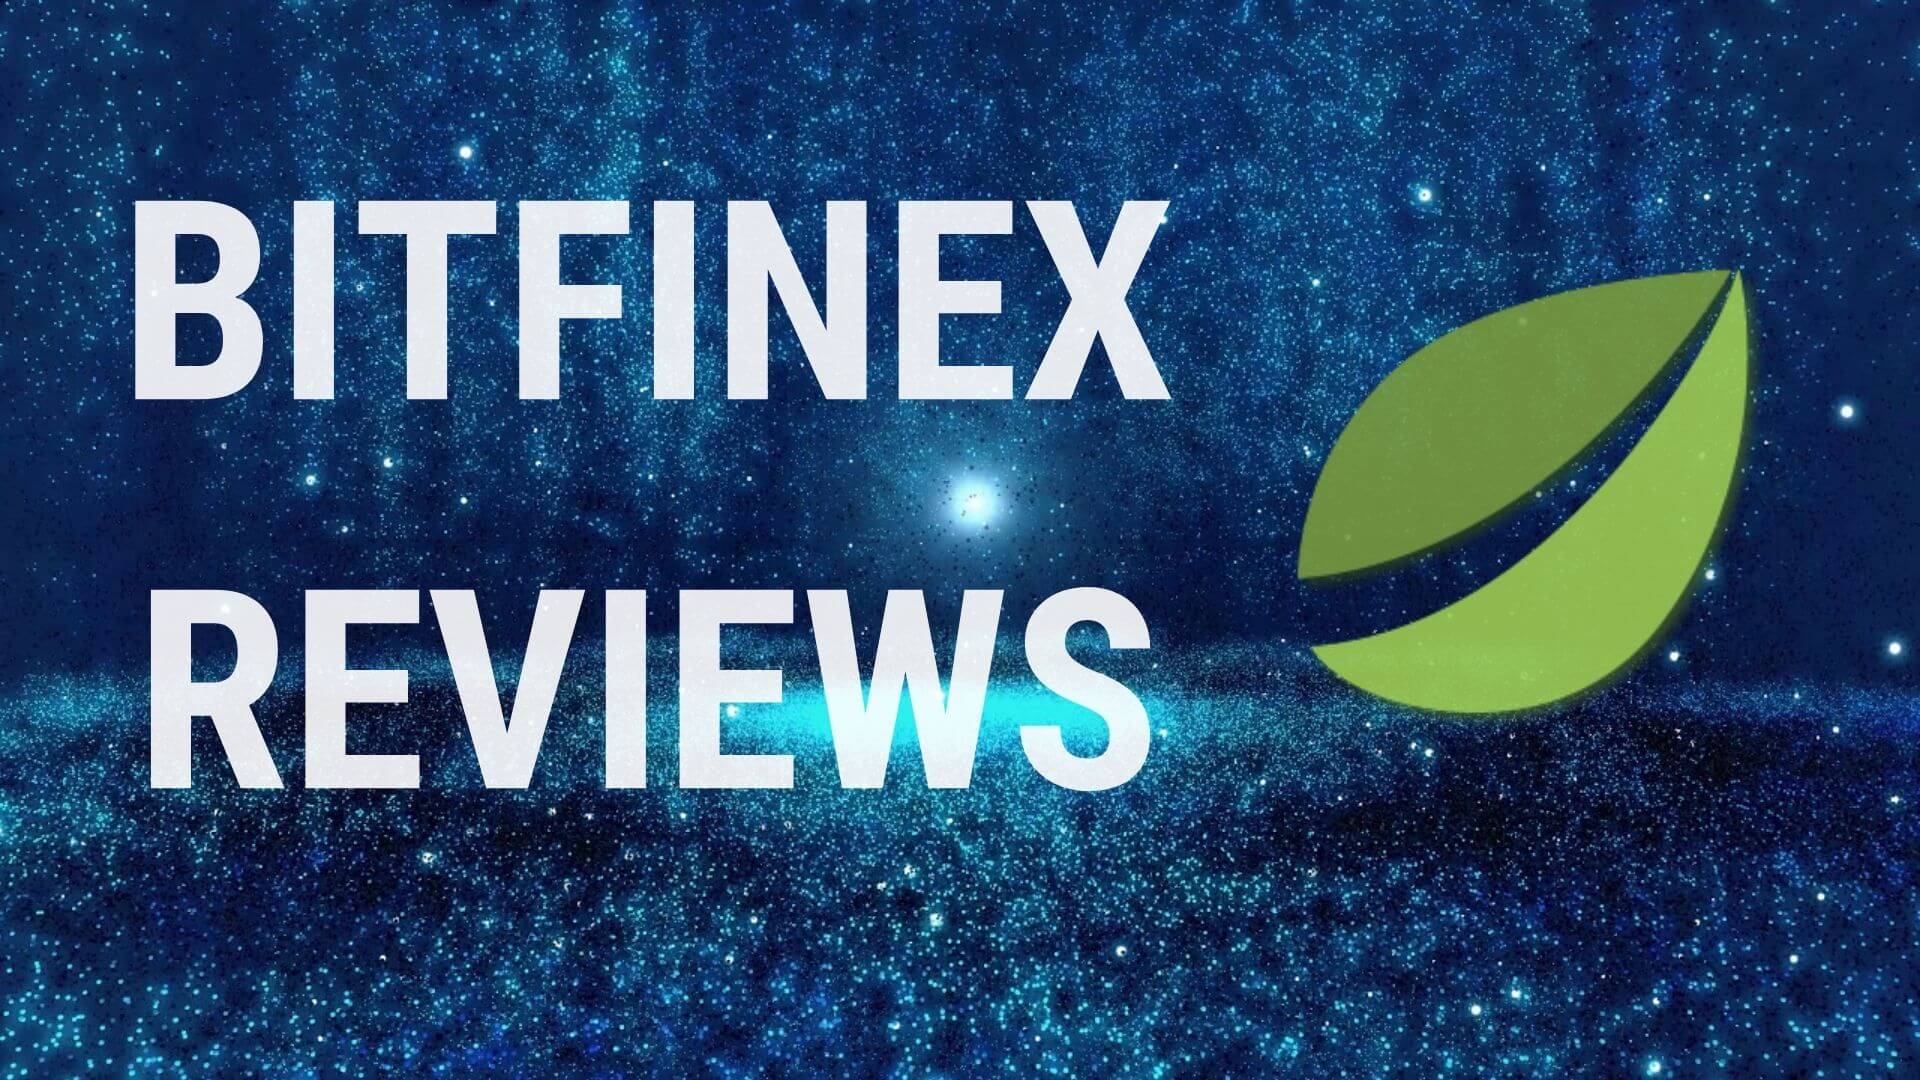 Bitfinex Reviews 2019|Deposit Fees, Withdraw Fees, Trading ...